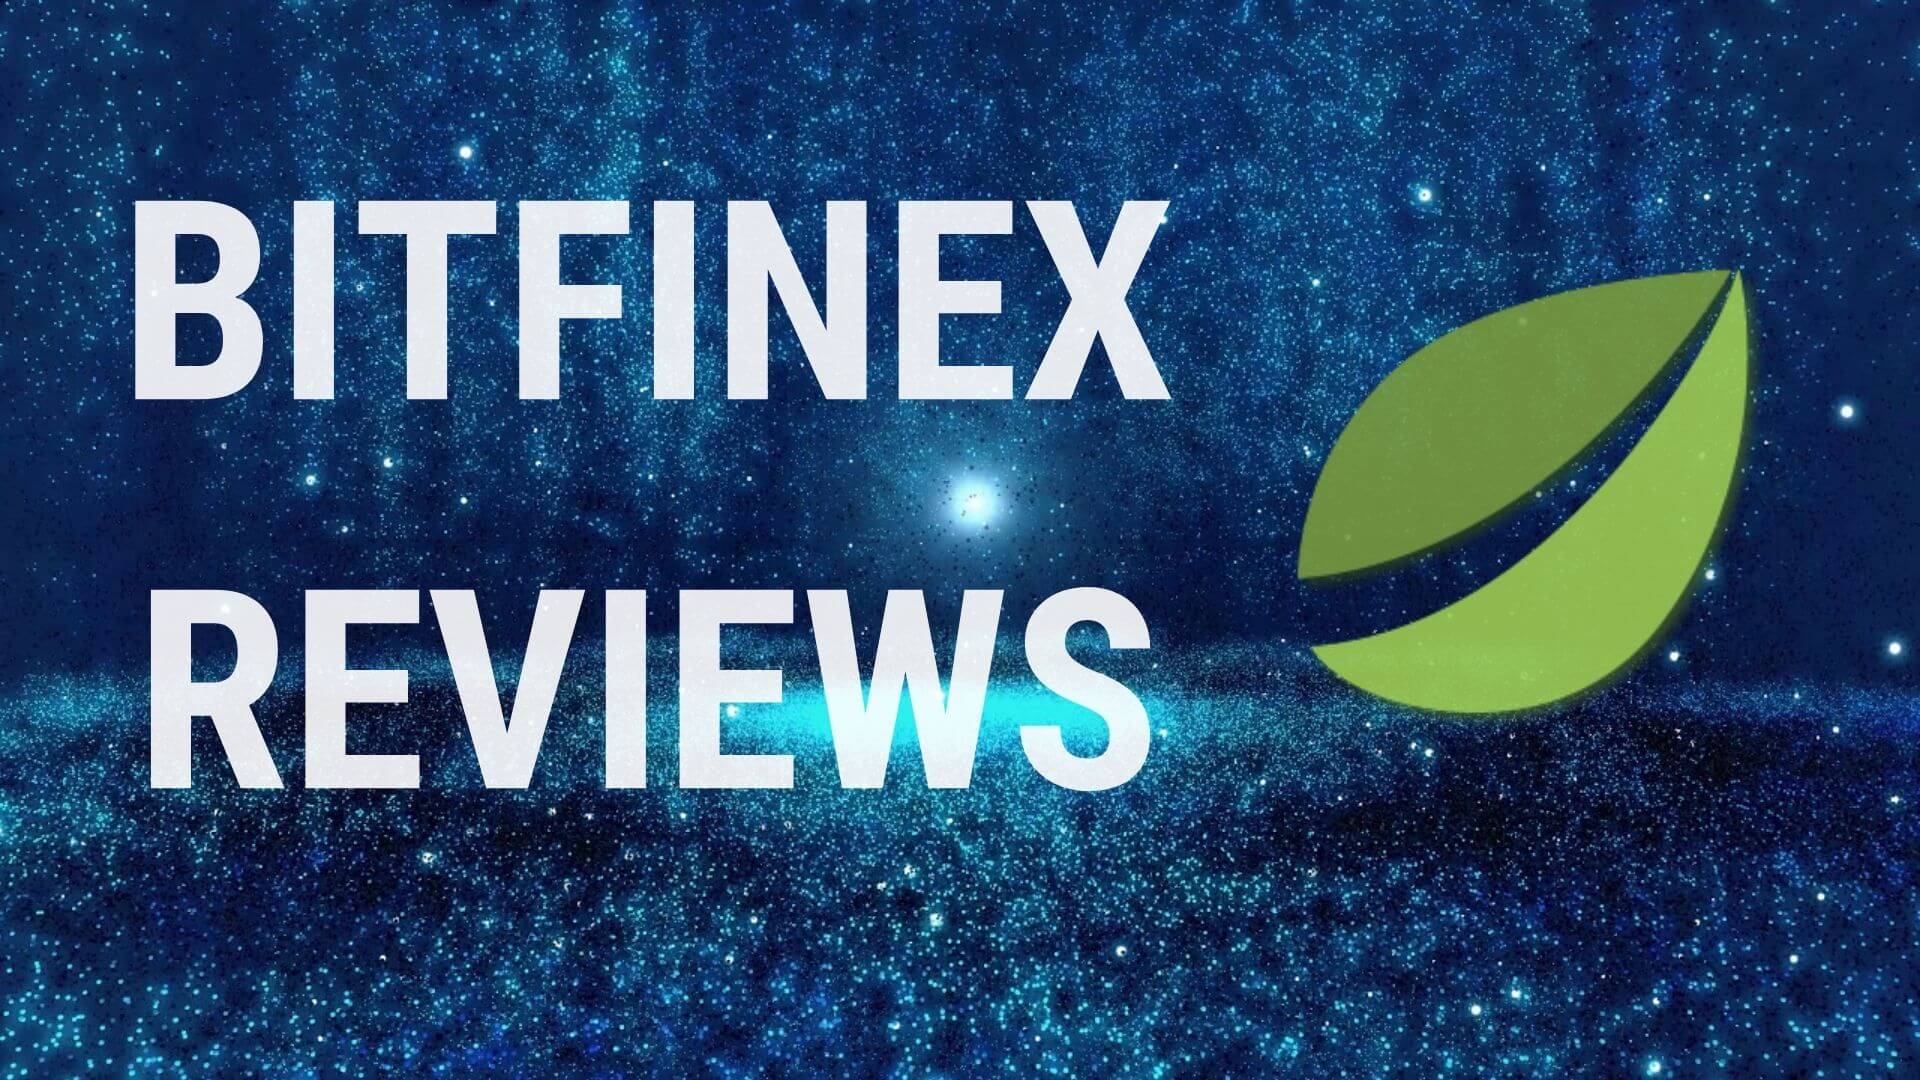 Bitfinex Reviews 2019|Deposit Fees, Withdraw Fees, Trading ...